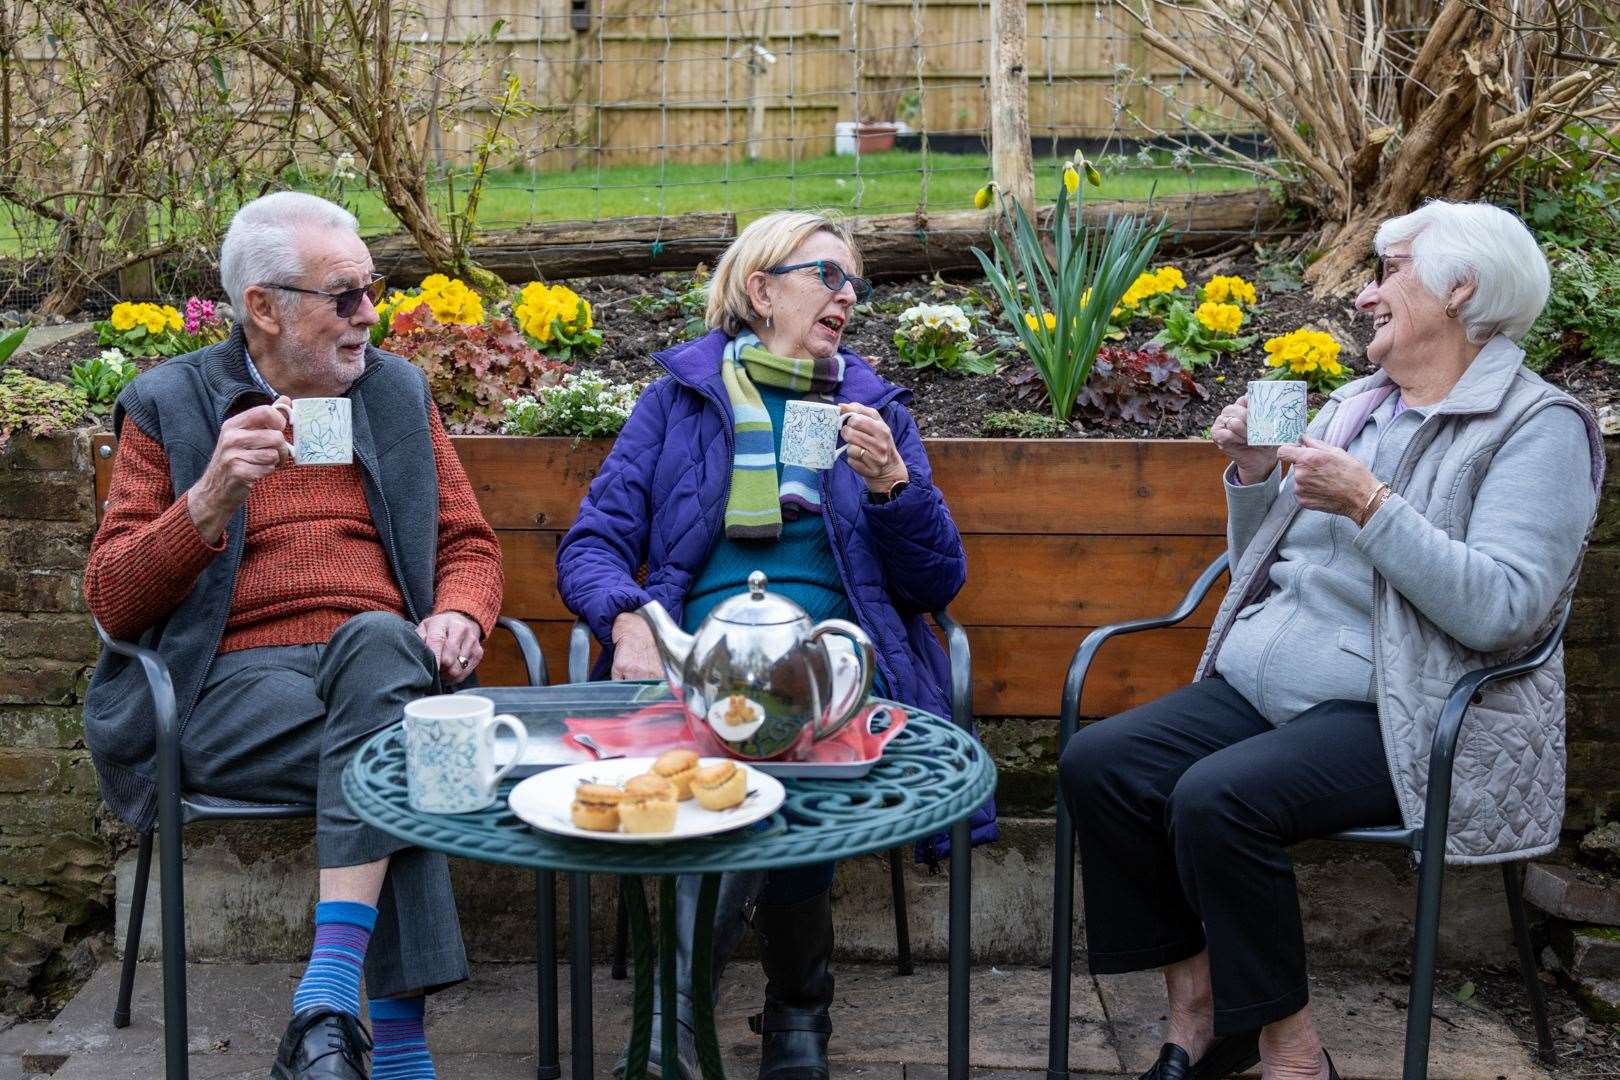 Tony Gostling photographed these neighbours enjoying lockdown tea and hot mince pies in the garden when Covid restrictions were in force